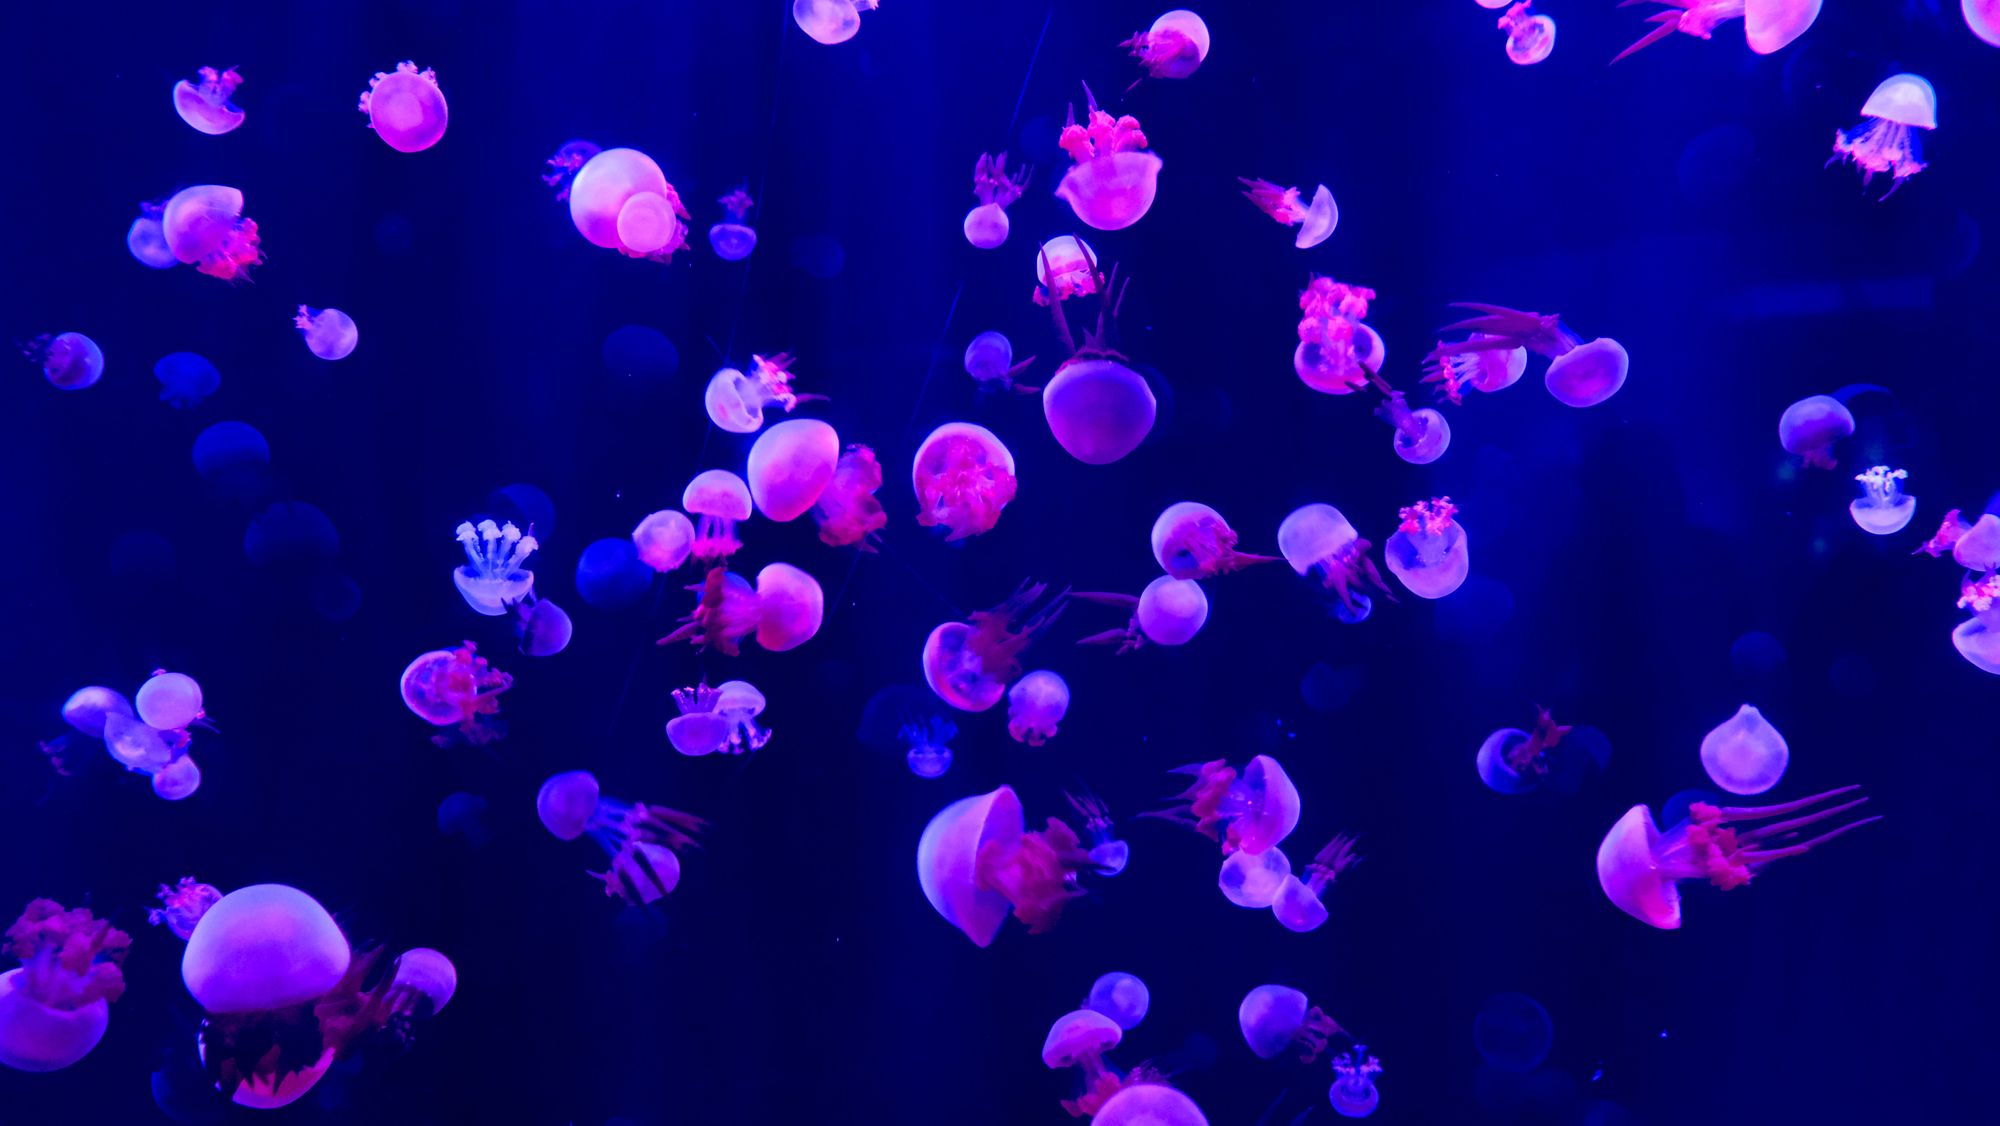 Jellyfish populations are booming because of climate change